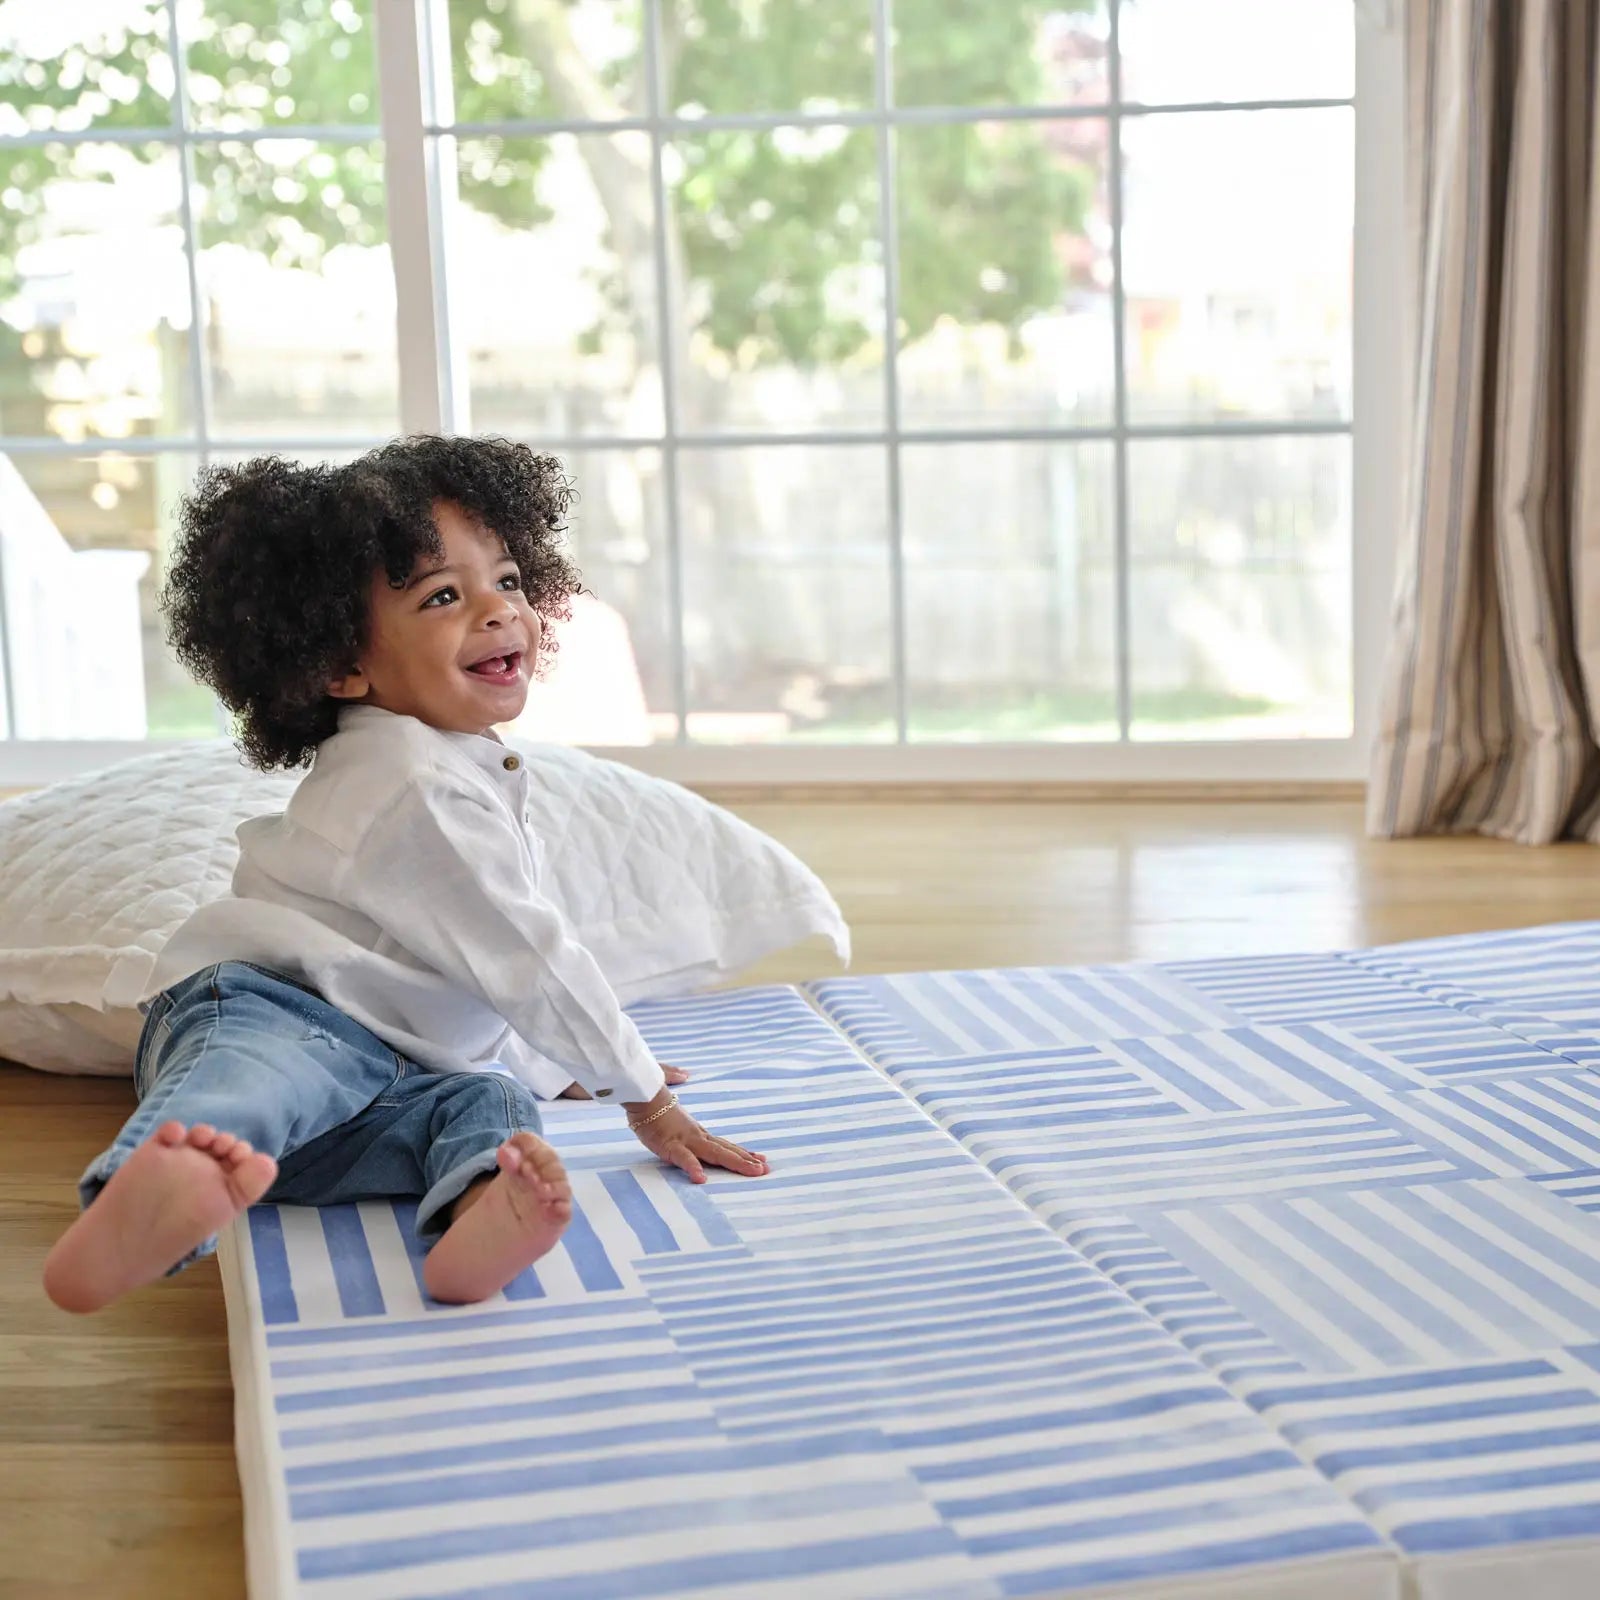 French blue and white inverted stripe tumbling mat with toddler smiling and laying down near the corner of the mat